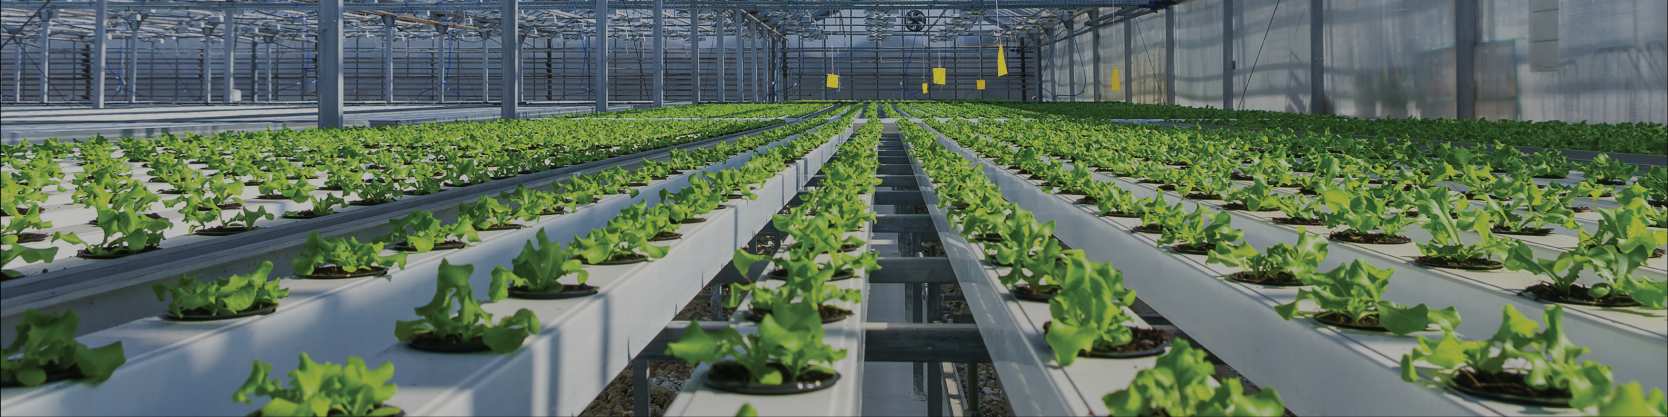 Leafy greens being grown in a hydroponic greenhouse